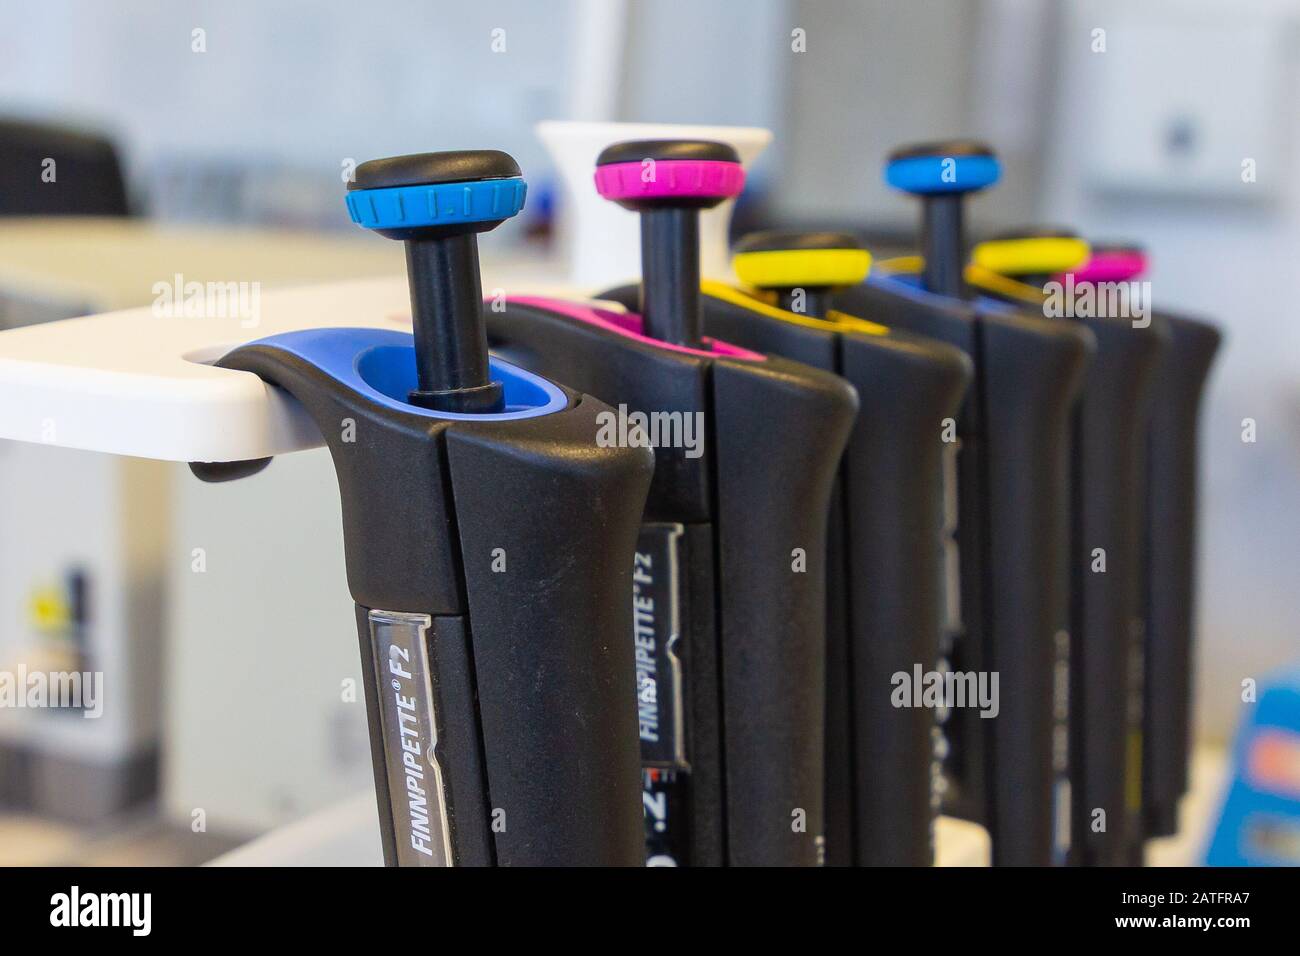 Chemical or Clinical laboratory tools eppendorf. Automatic pipettes are on the holder. Berlin, February 2020. Stock Photo